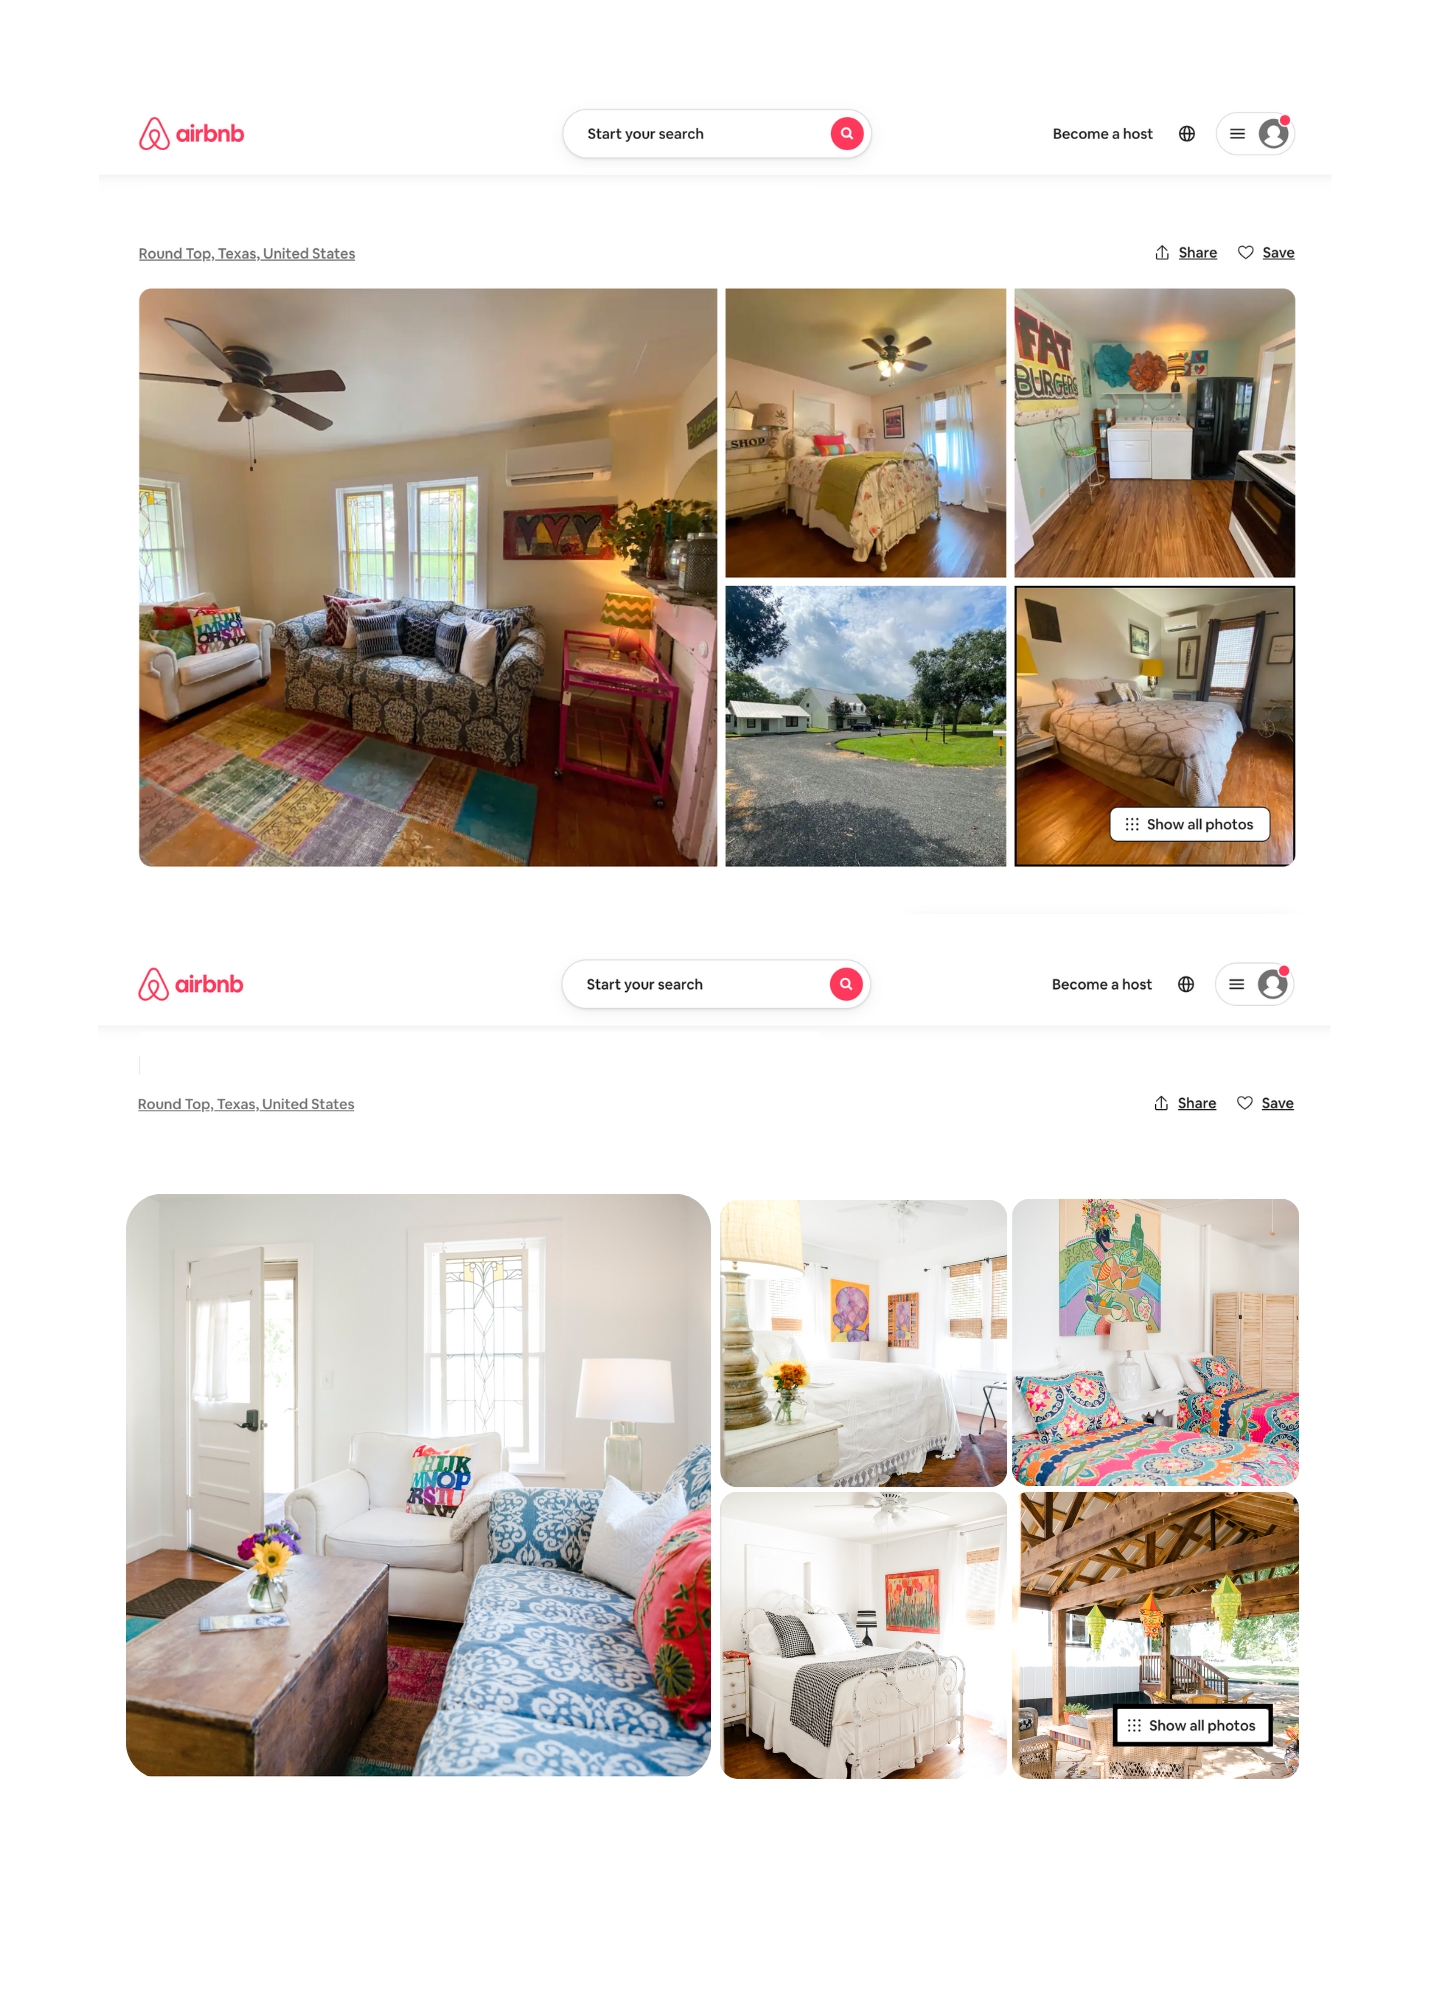 Investing in a professional Airbnb photographer such as me a Houston Interior Design Photographer you are receiving high quality Airbnb photography images that will grow your listing.